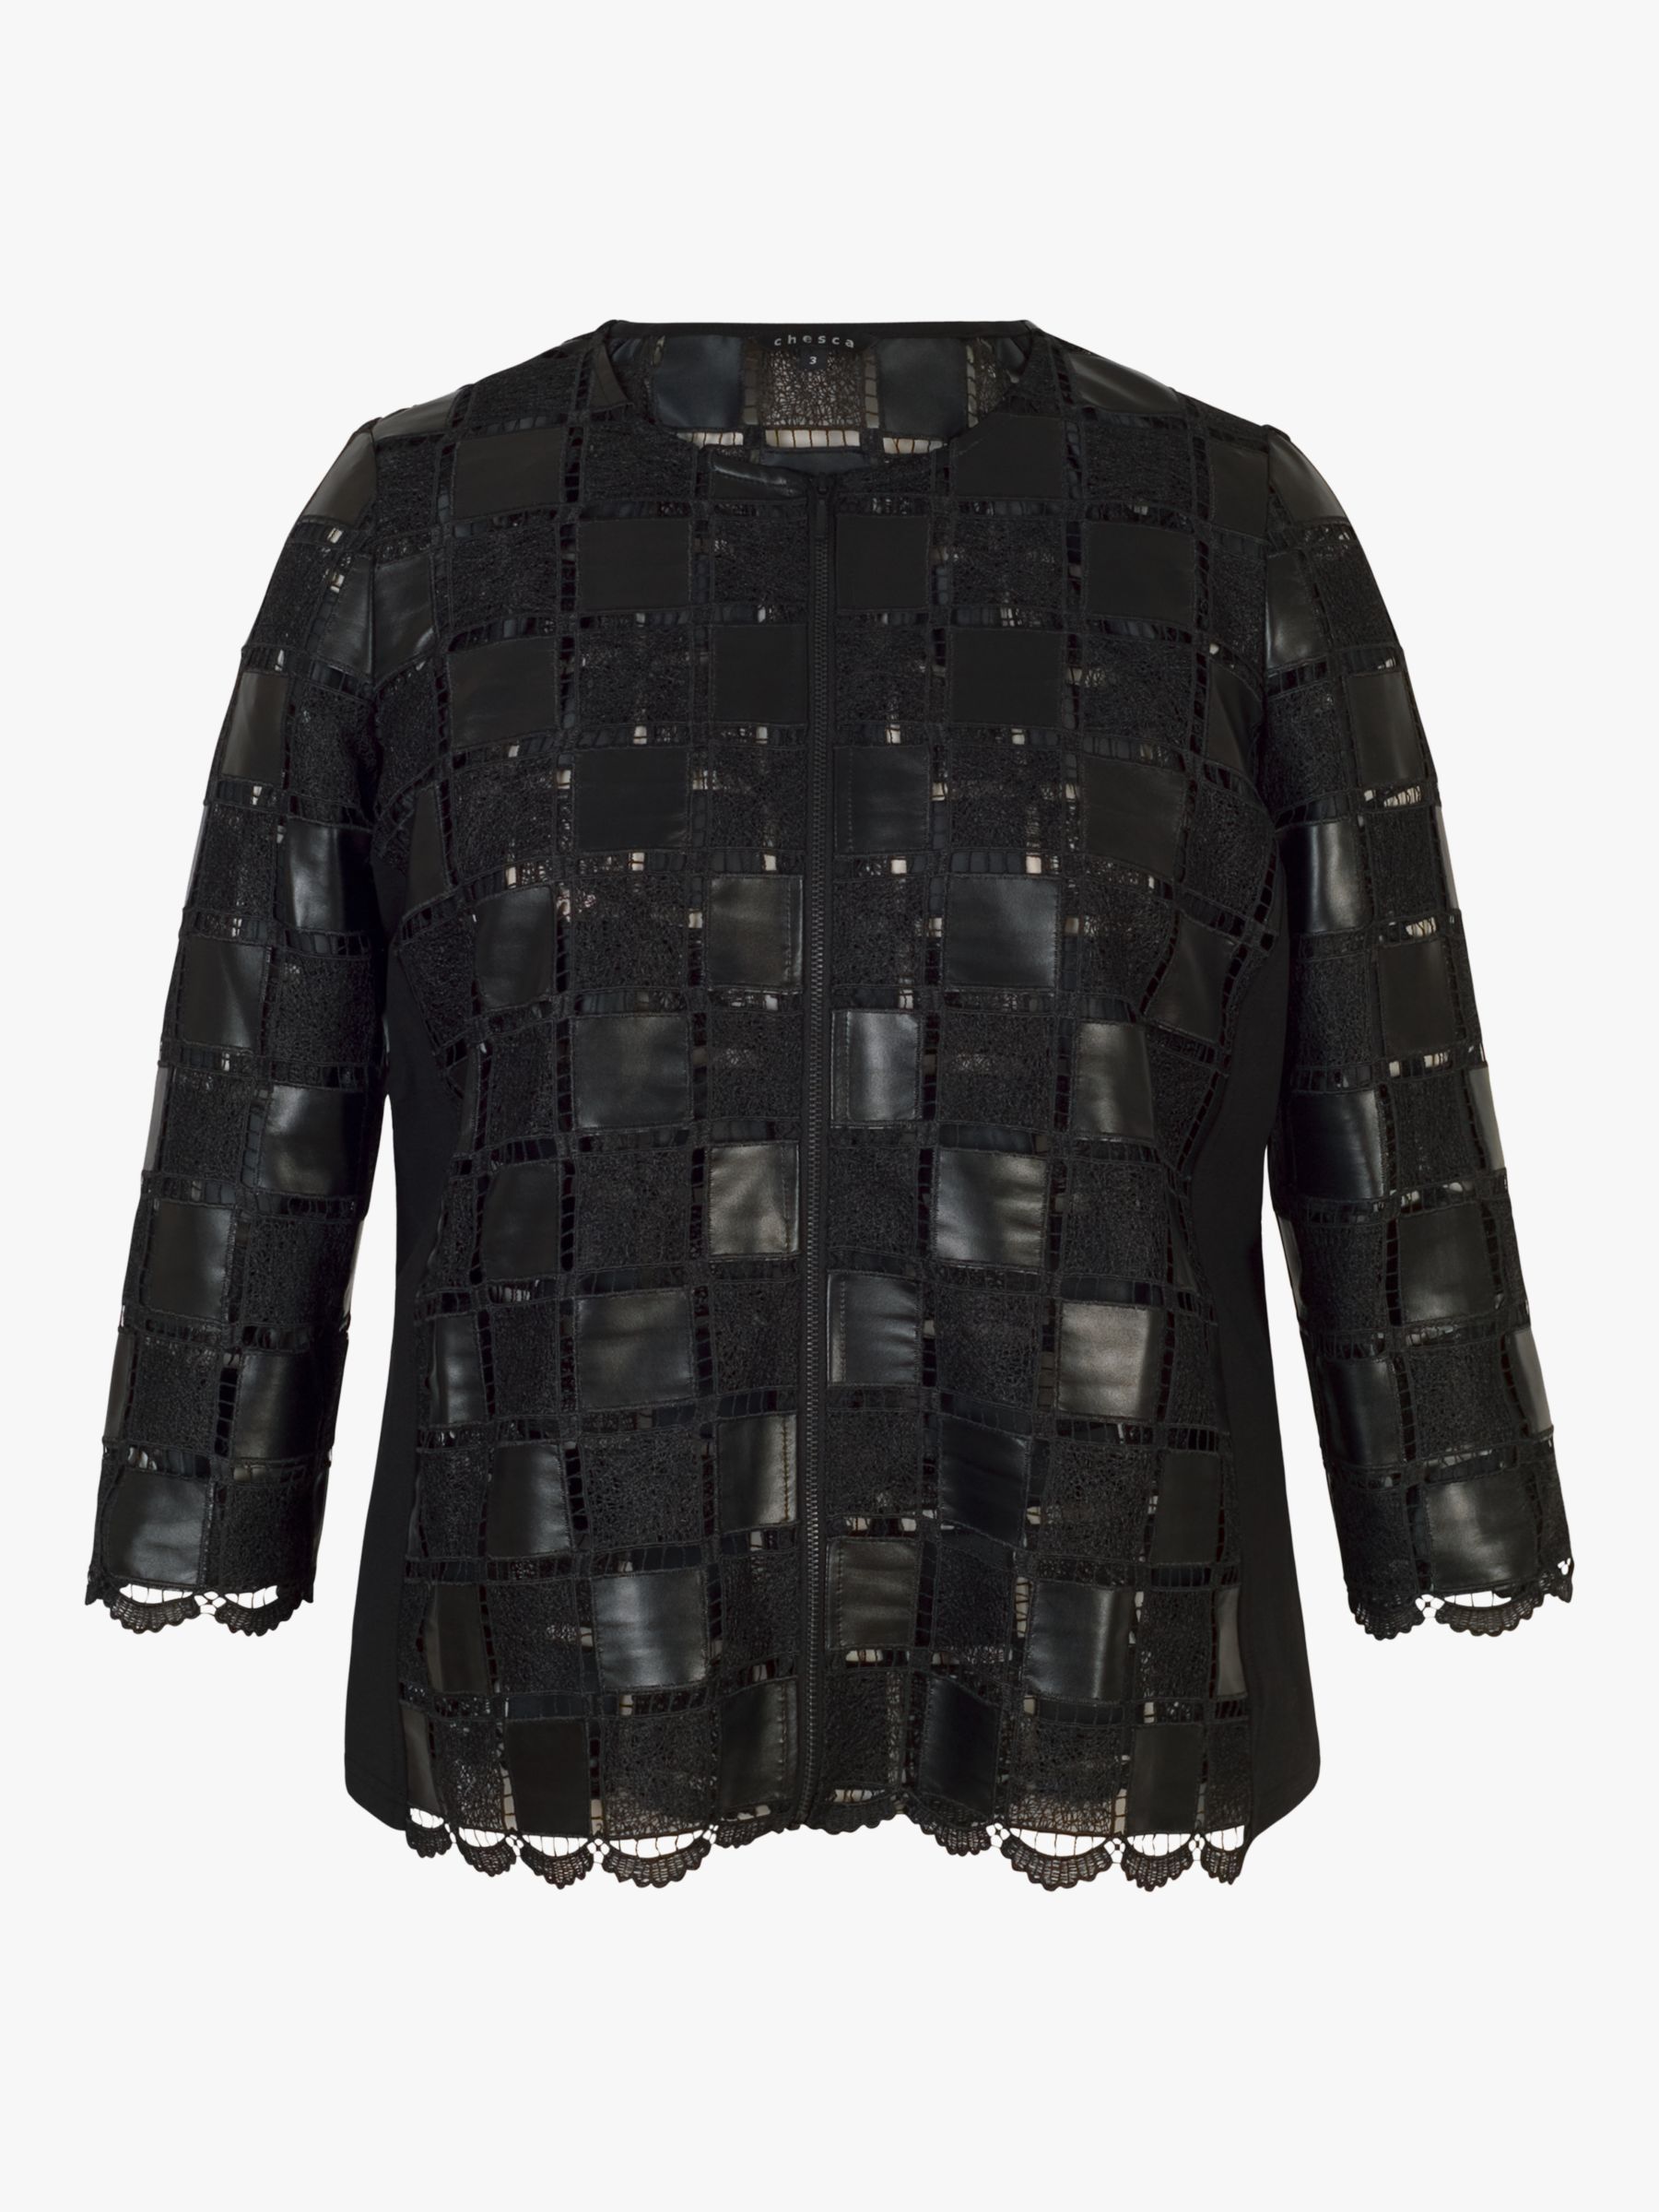 chesca Leatherette Check Jacket, Black at John Lewis & Partners